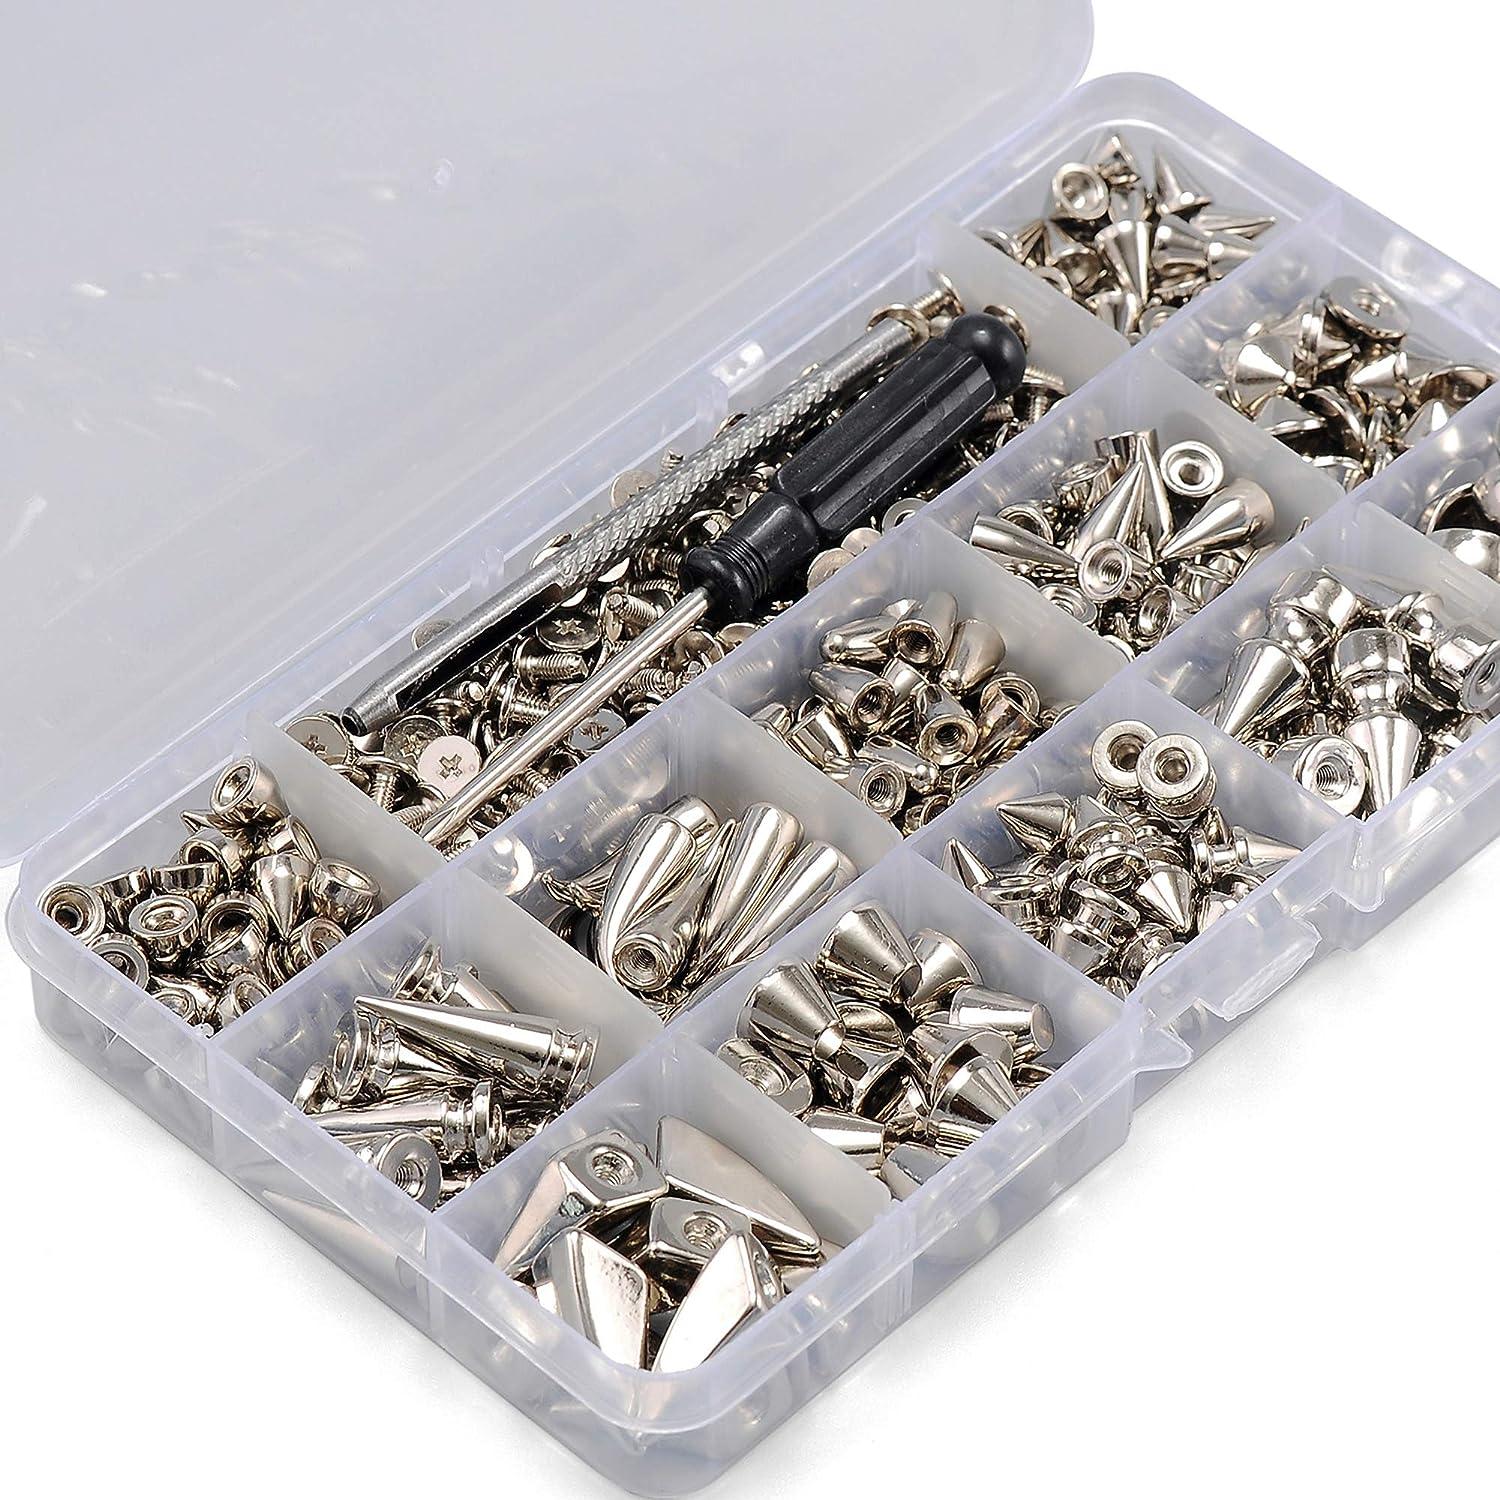 YORANYO 270 Sets Mixed Shape Spikes and Studs Silver Color Screw Back  Bullet Cone Studs and Spikes Rivet Kit with Install Tools for Leather Craft  Clothing Shoes Belts Bags Dog Collars DIY